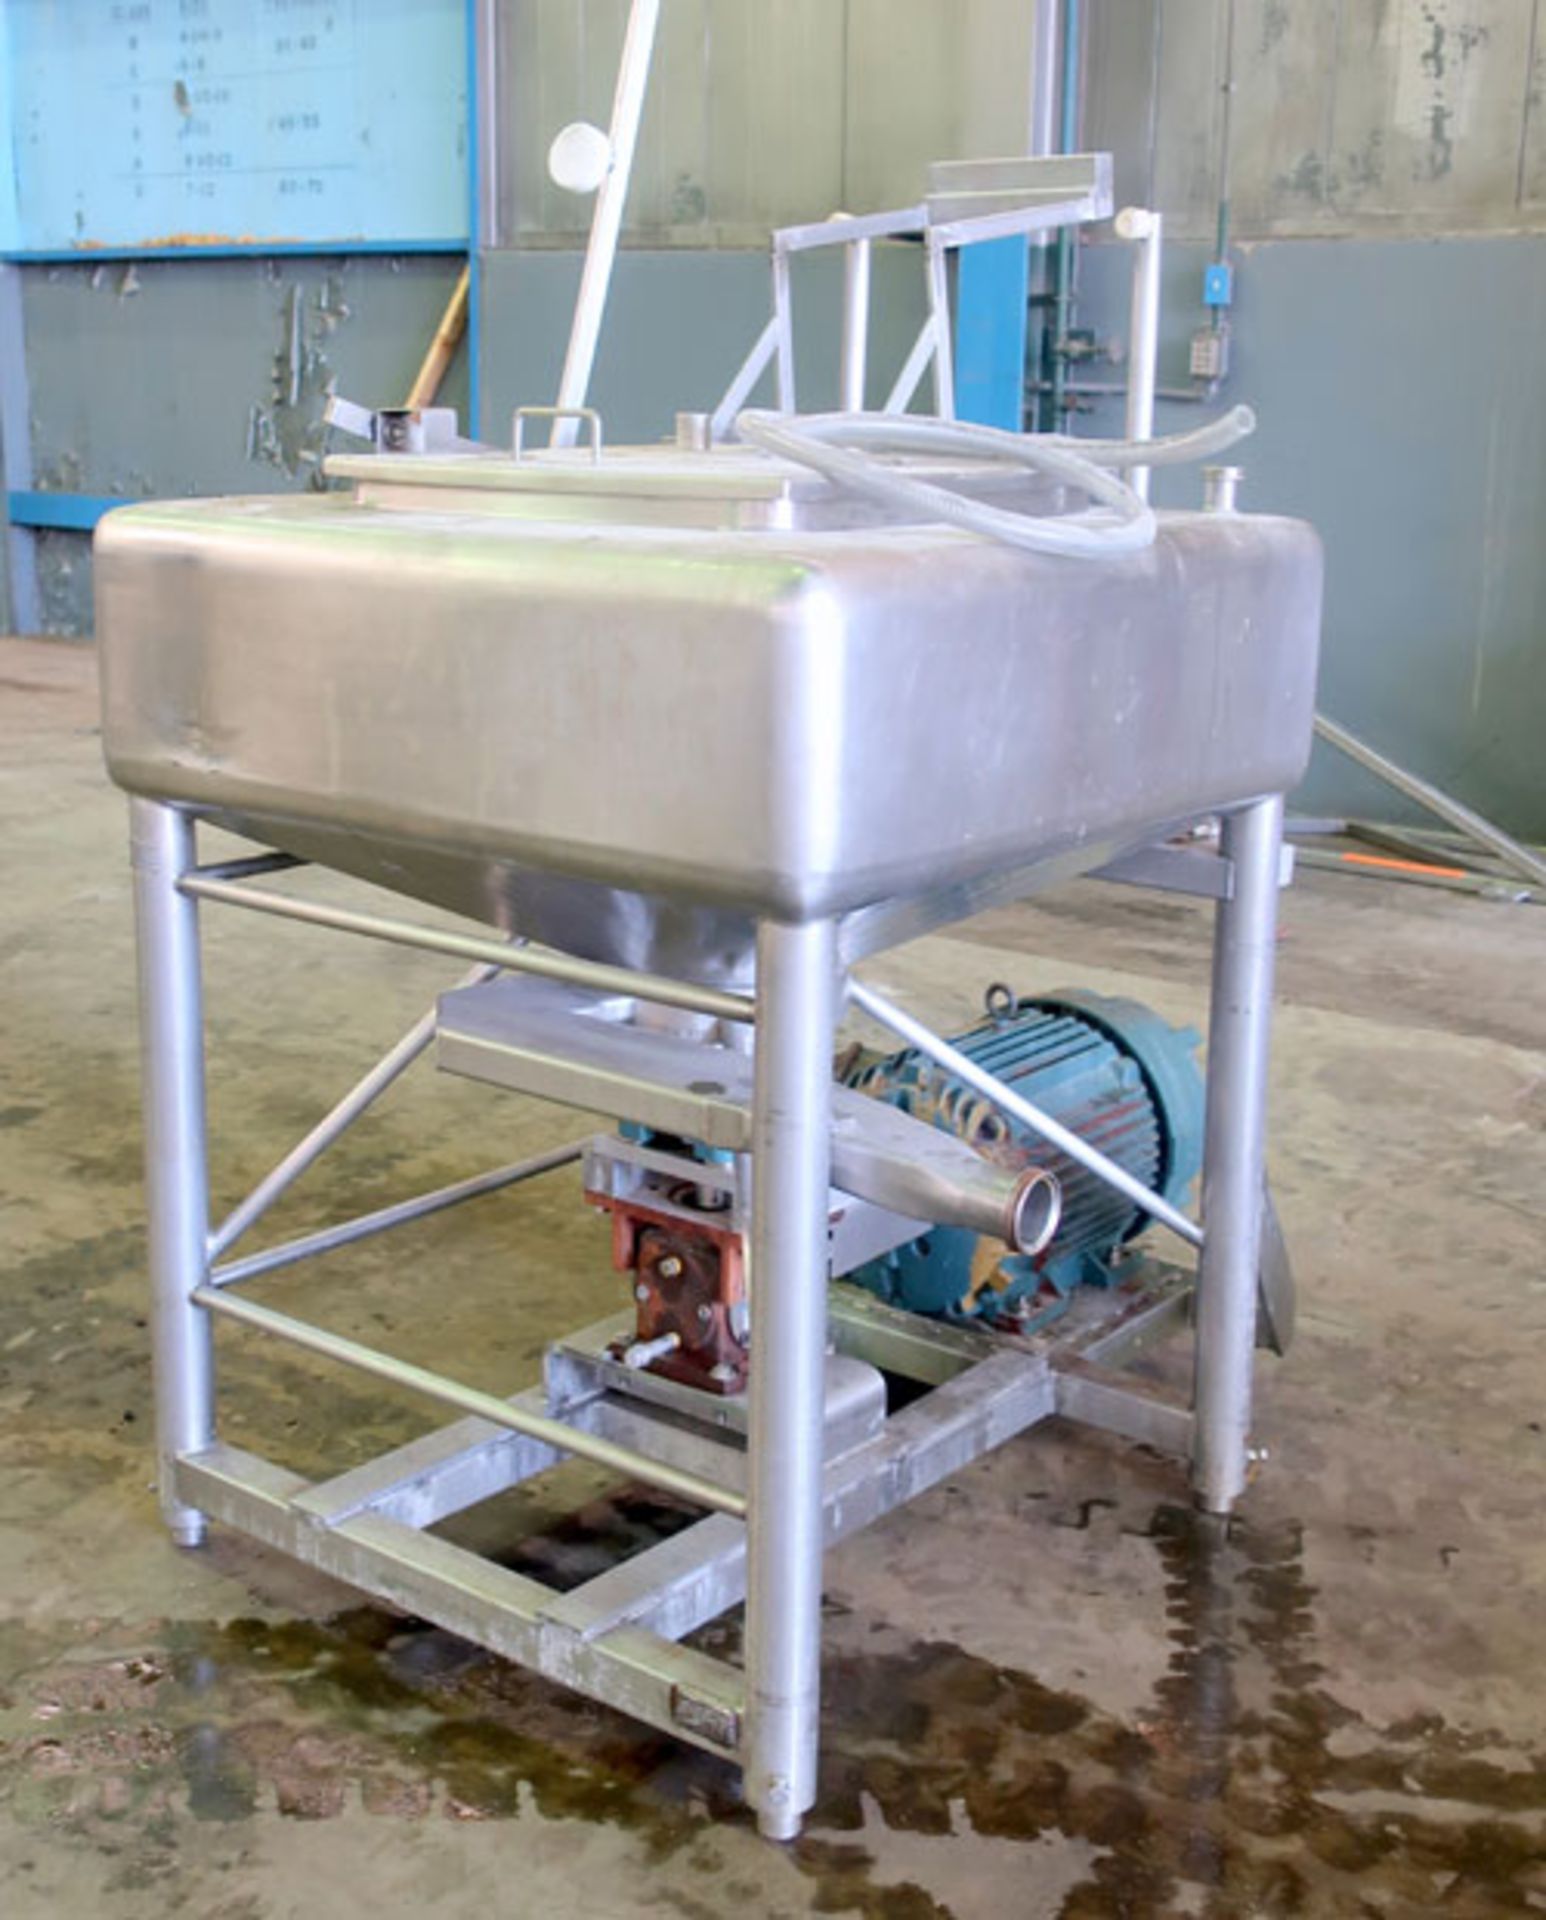 APV Crepaco Liquiverter, approximately 25 gallon, Serial # E-4879. Mounted on (4) stainless steel